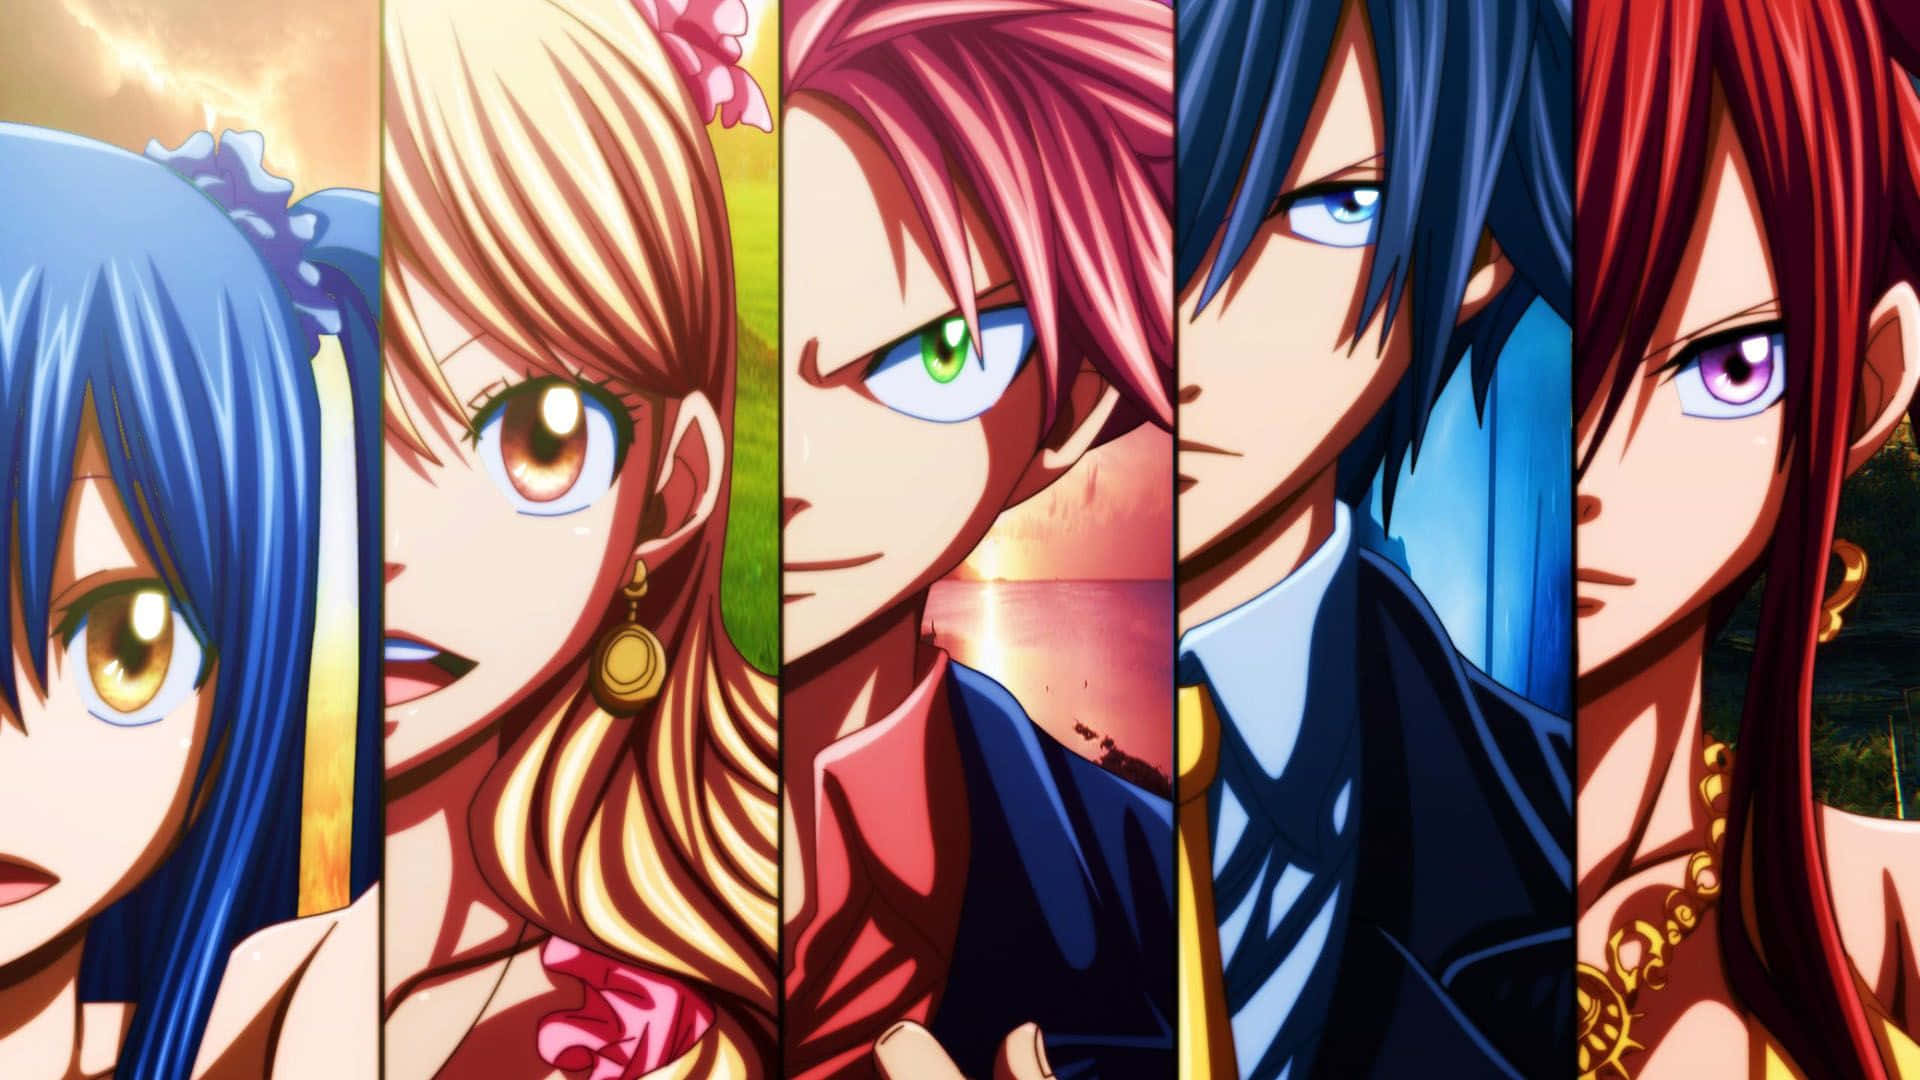 The heroes of Fairy Tail come together to save the world!